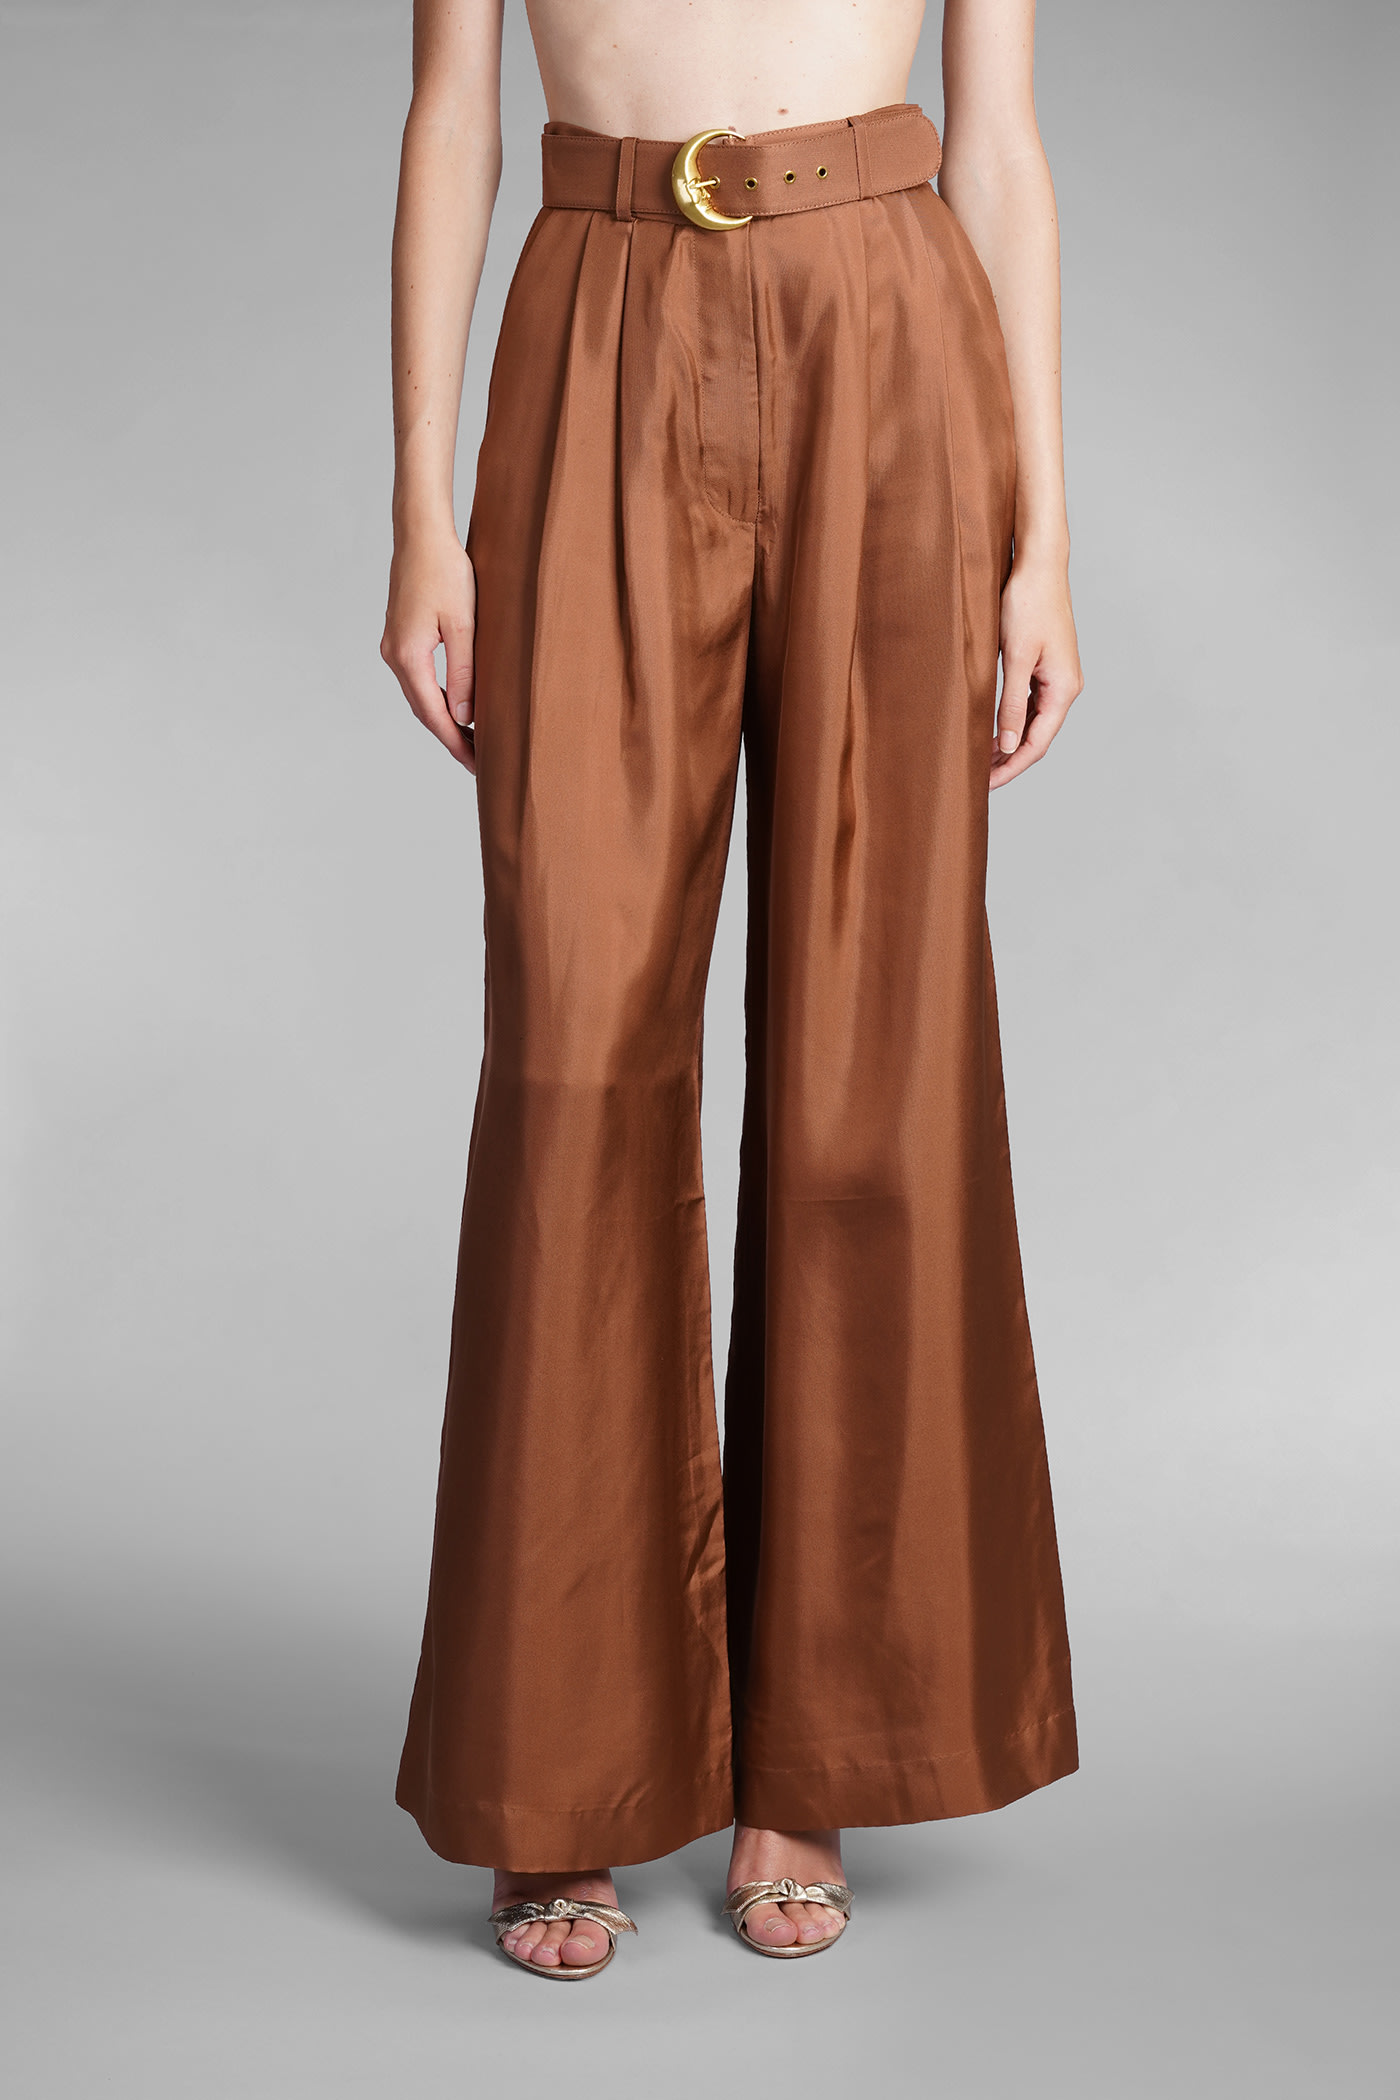 Zimmermann Pants In Leather Color Silk